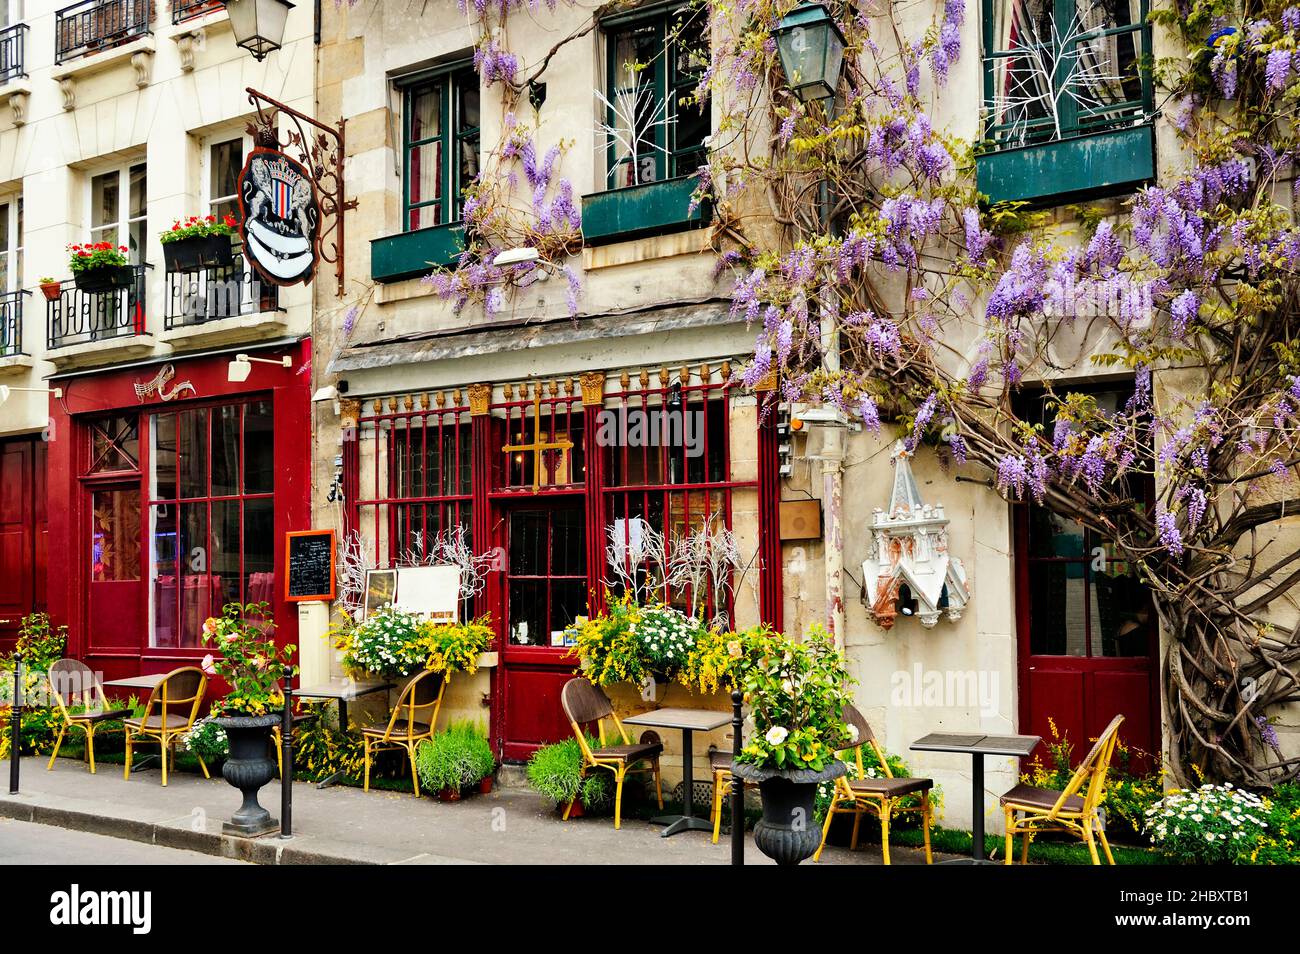 Cafe exterior, pavement exterior and flowering wisteria climbing plants, street signs. Stock Photo